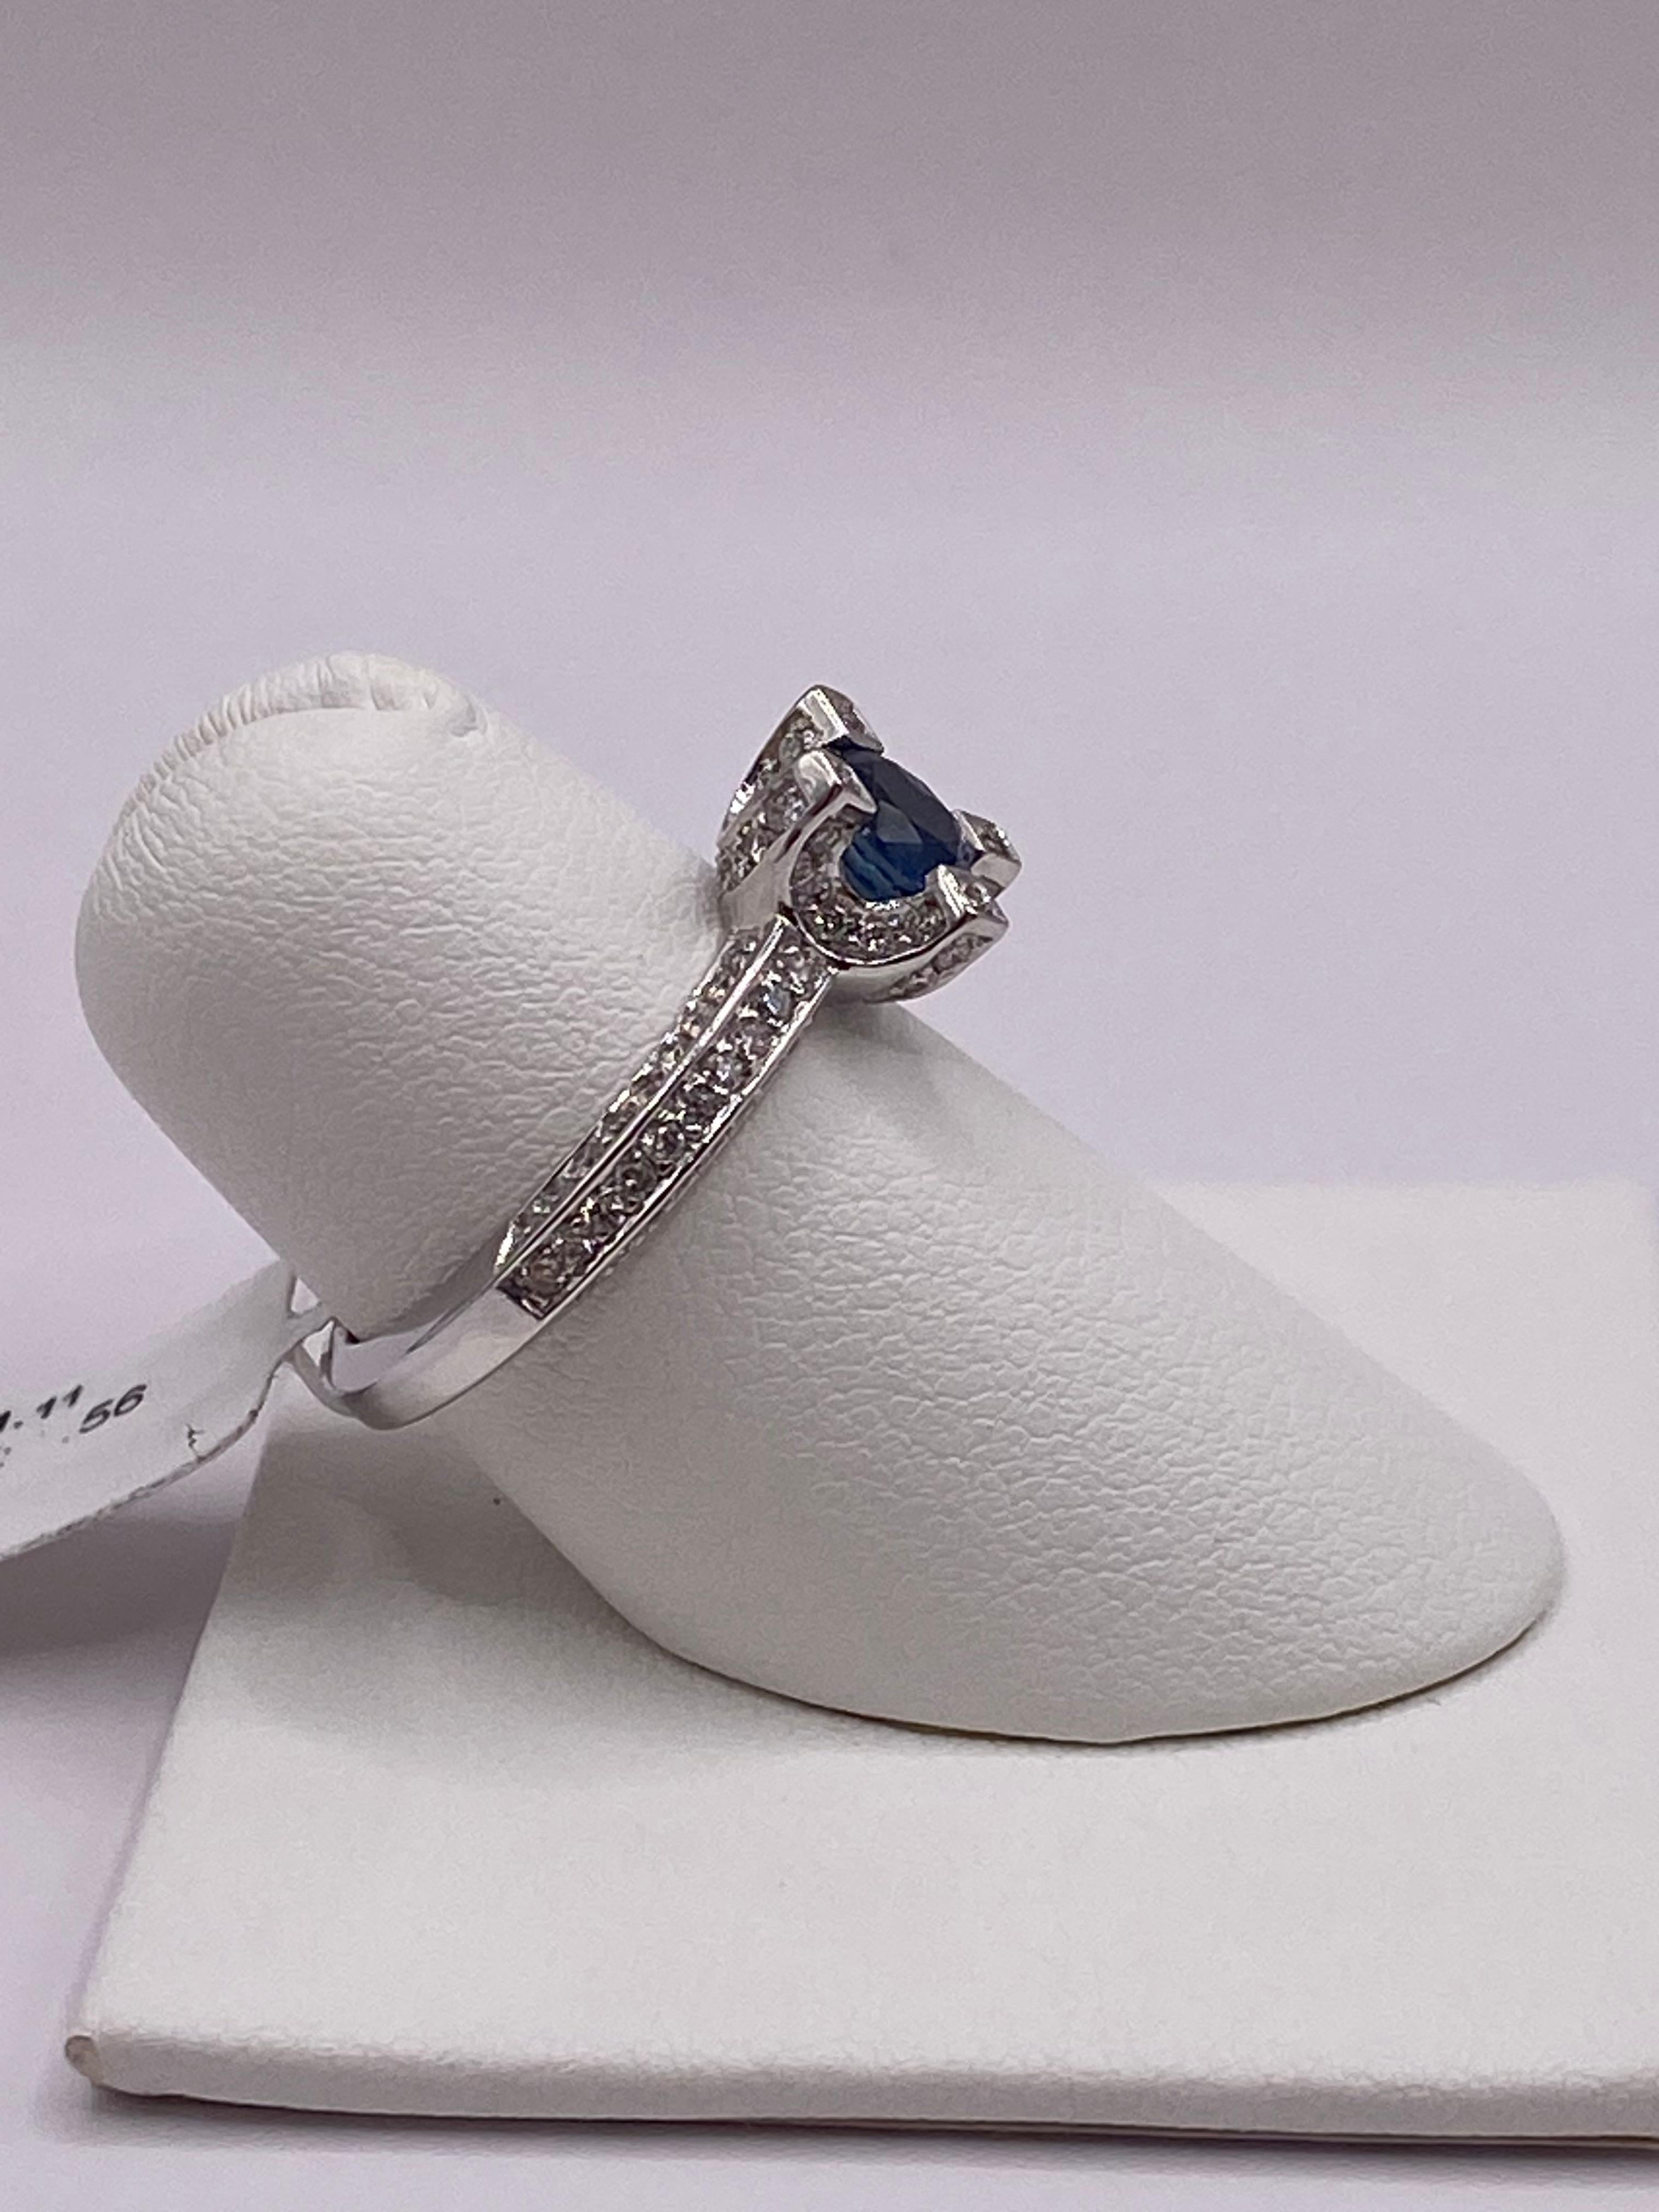 Round Cut 1.67ctw Sapphire & Diamond Pave Set Ring in 14KT White Gold For Sale